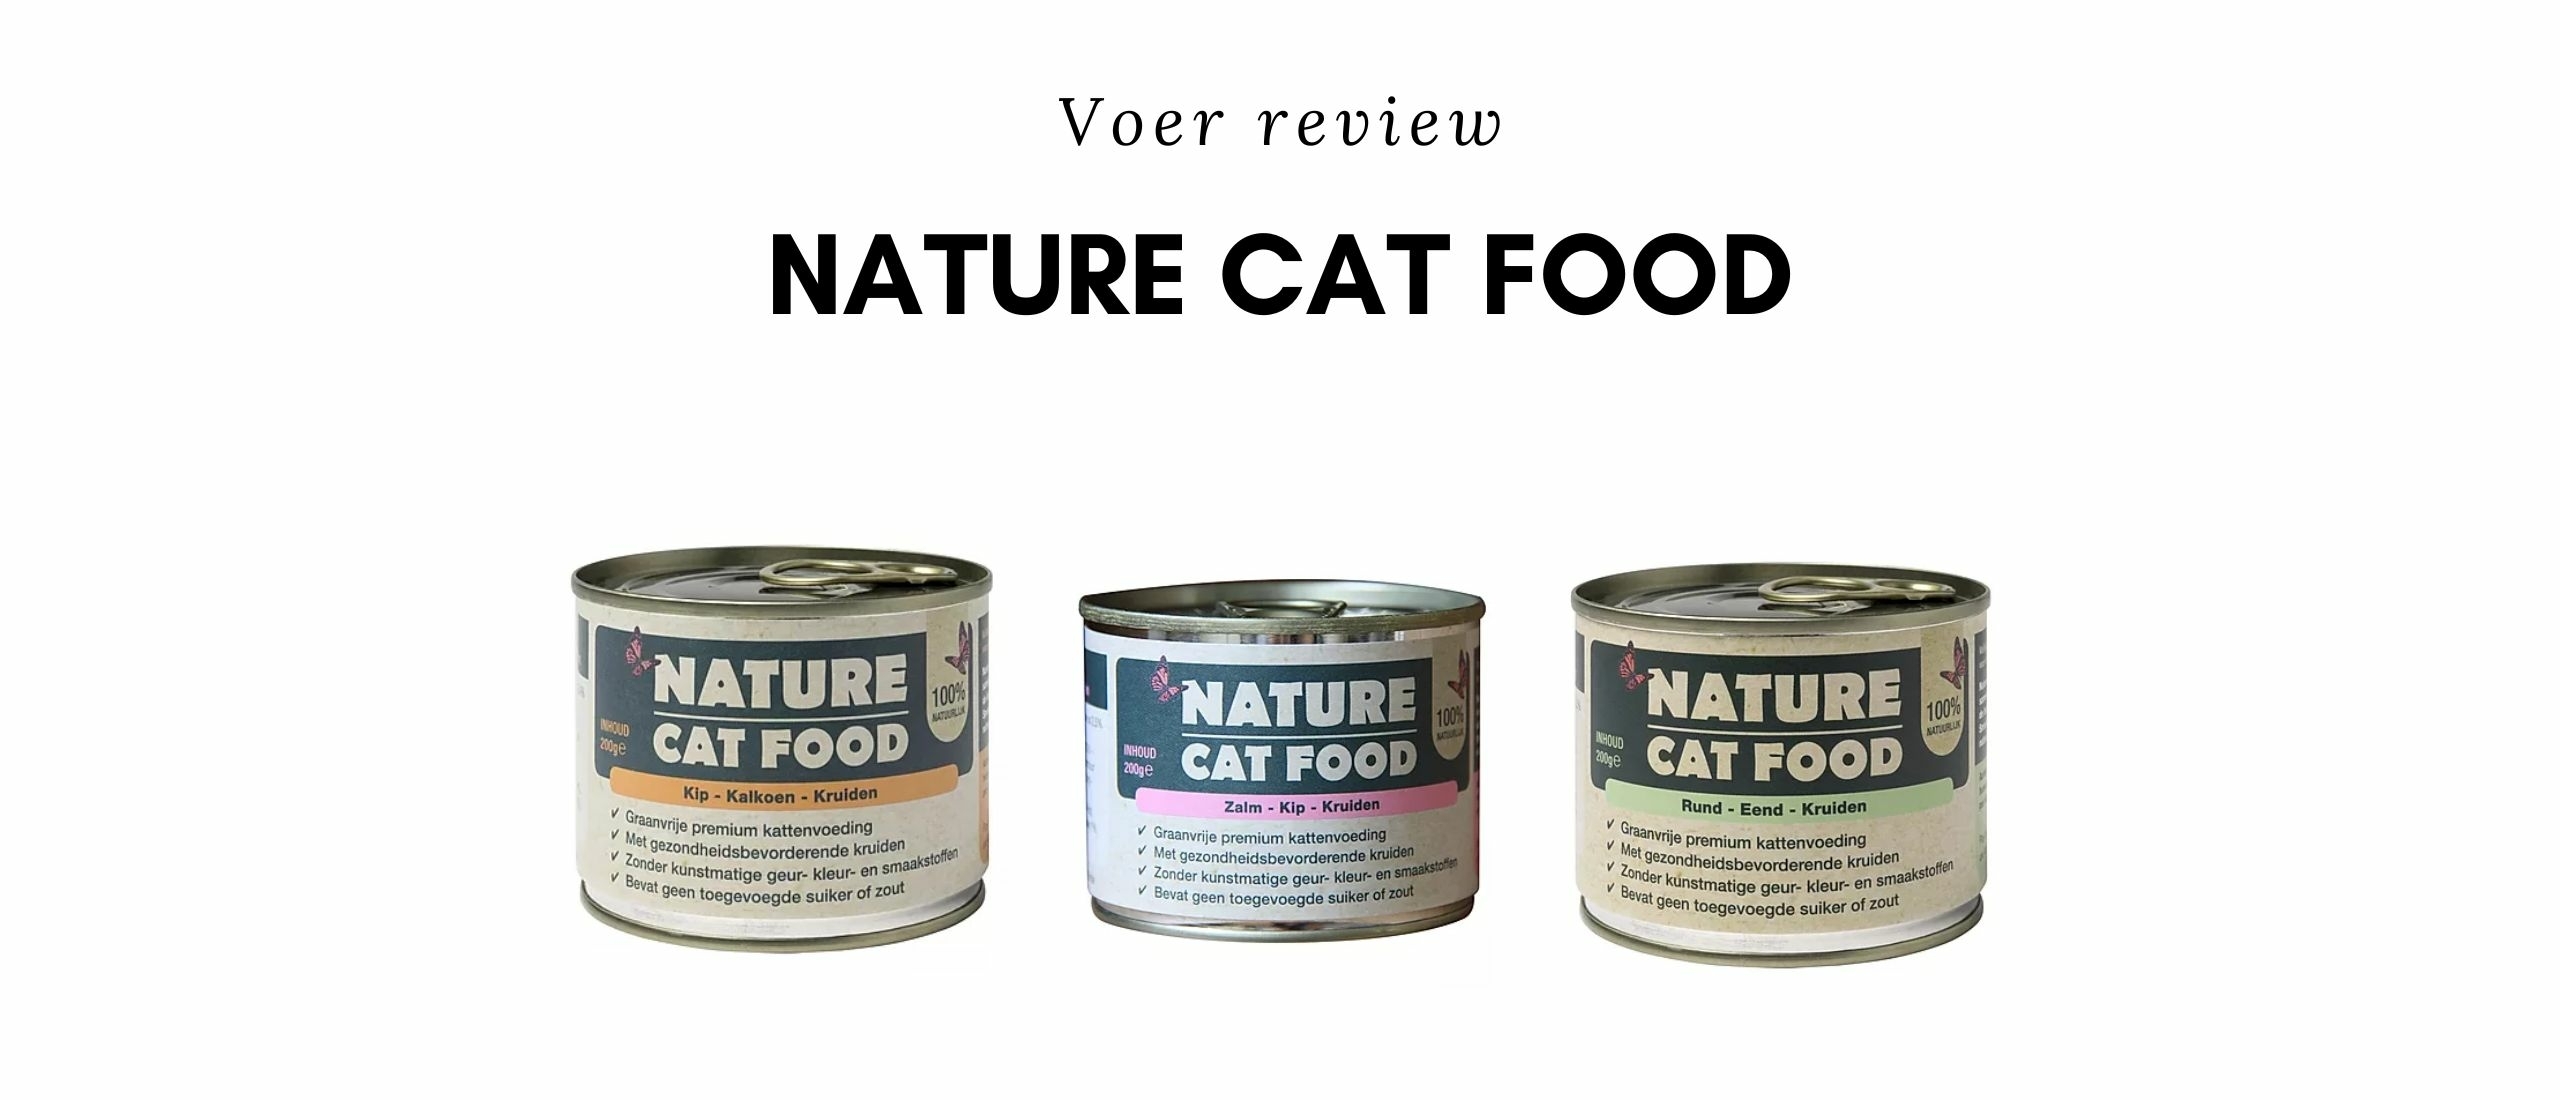 Voer Review Natures Cat Food